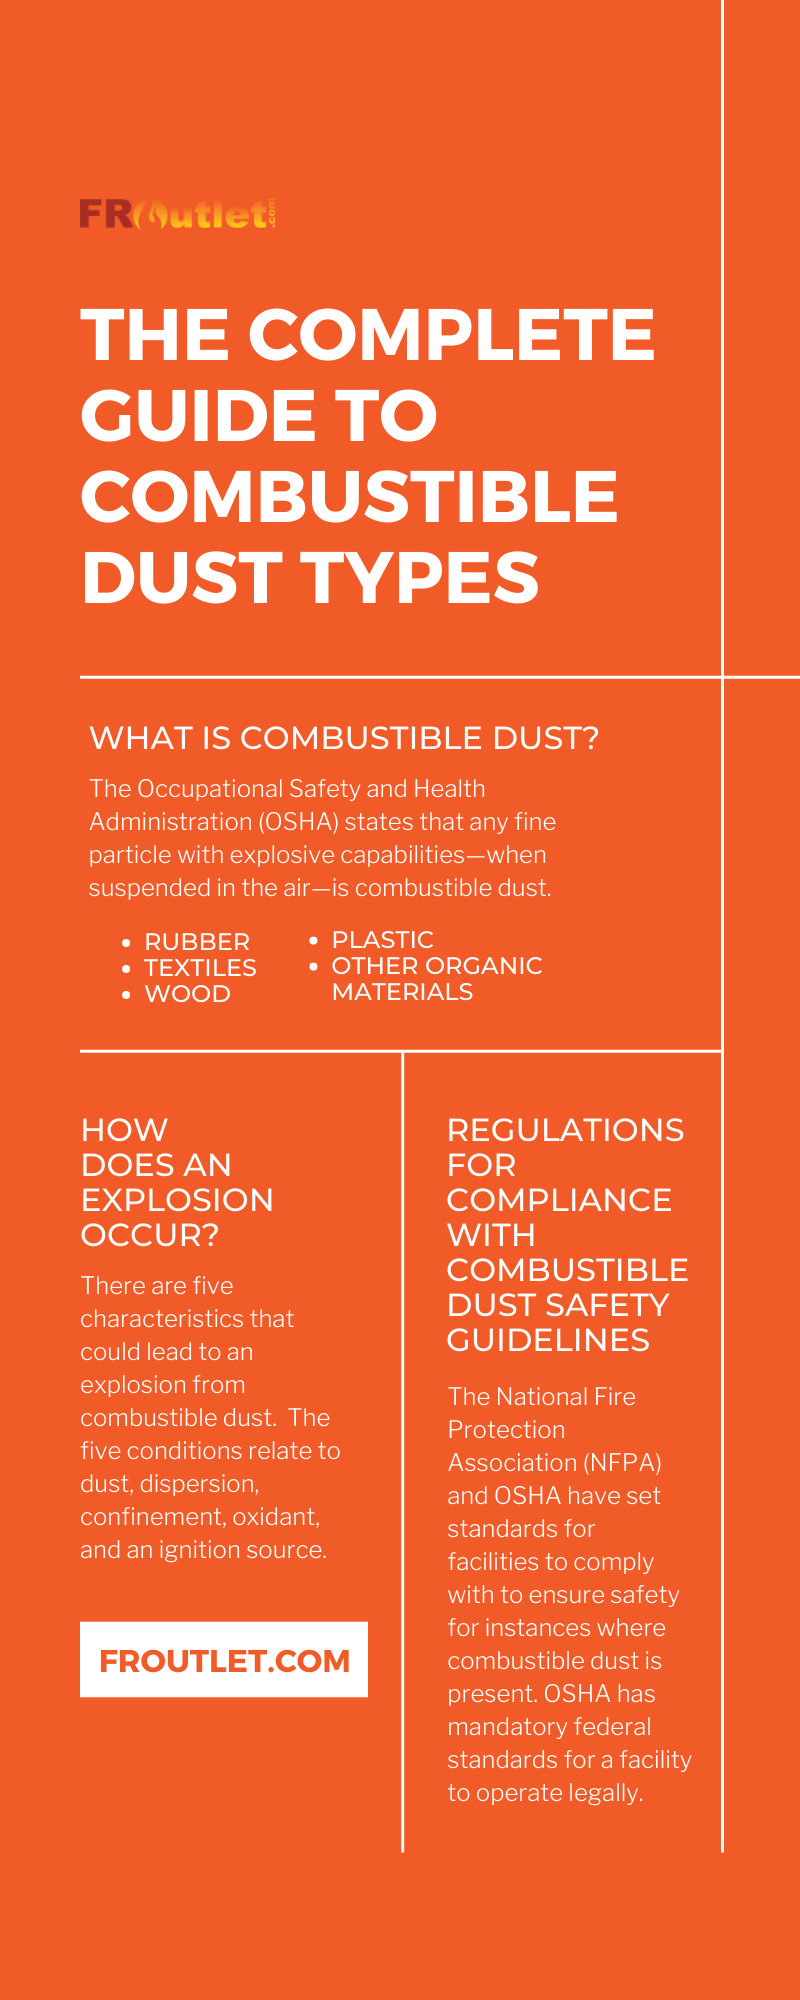 The Complete Guide to Combustible Dust Types